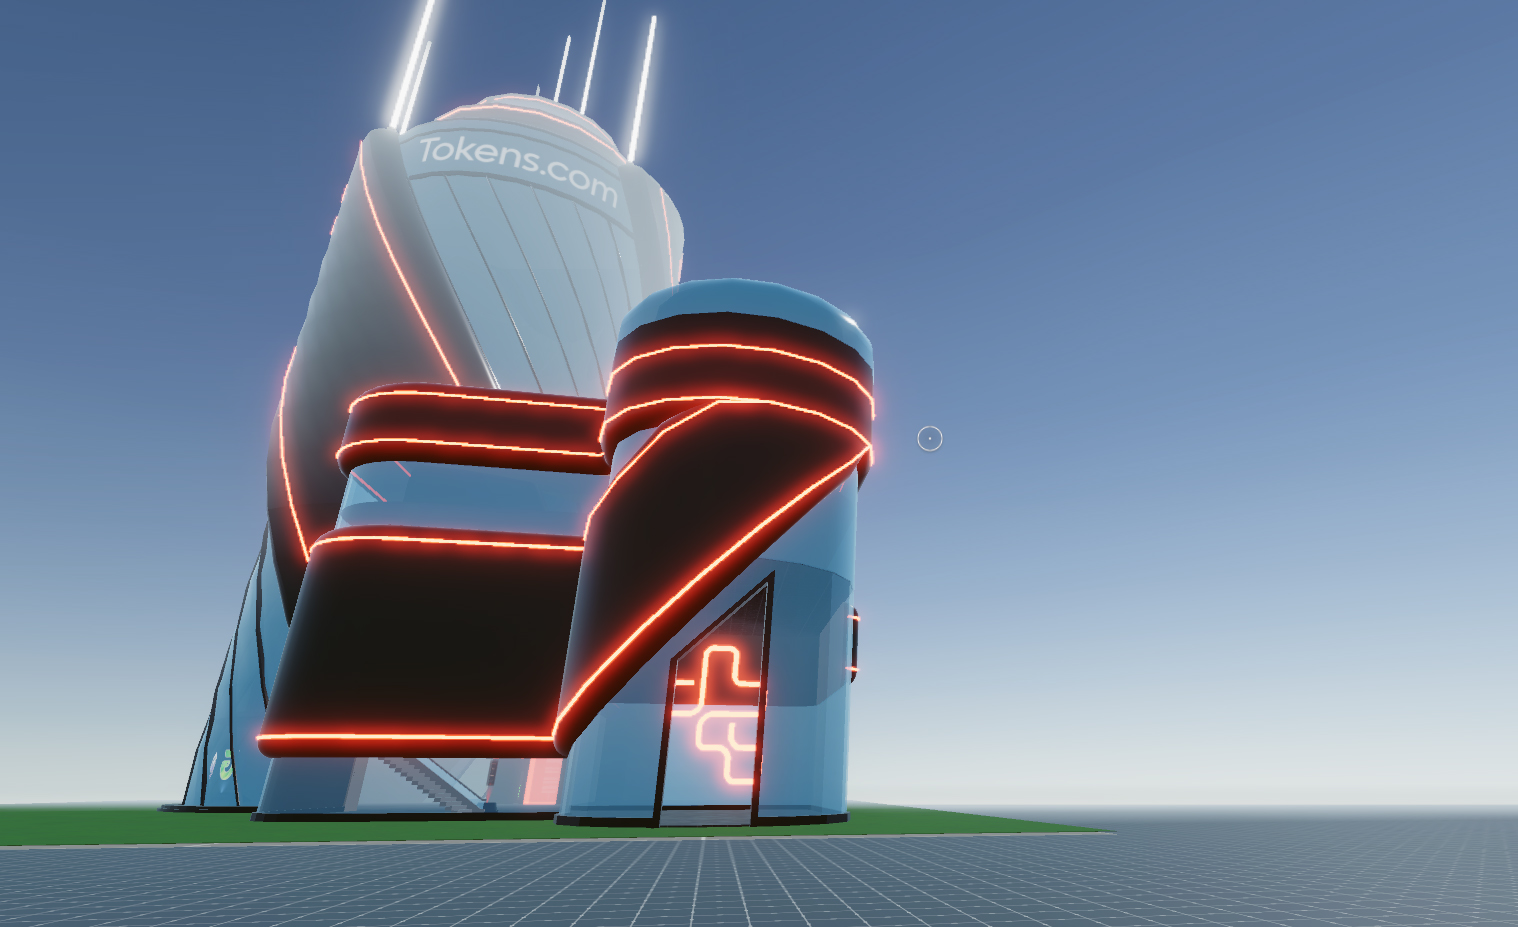 TerraZero is Building Bars in the Metaverse, Here's Why: 